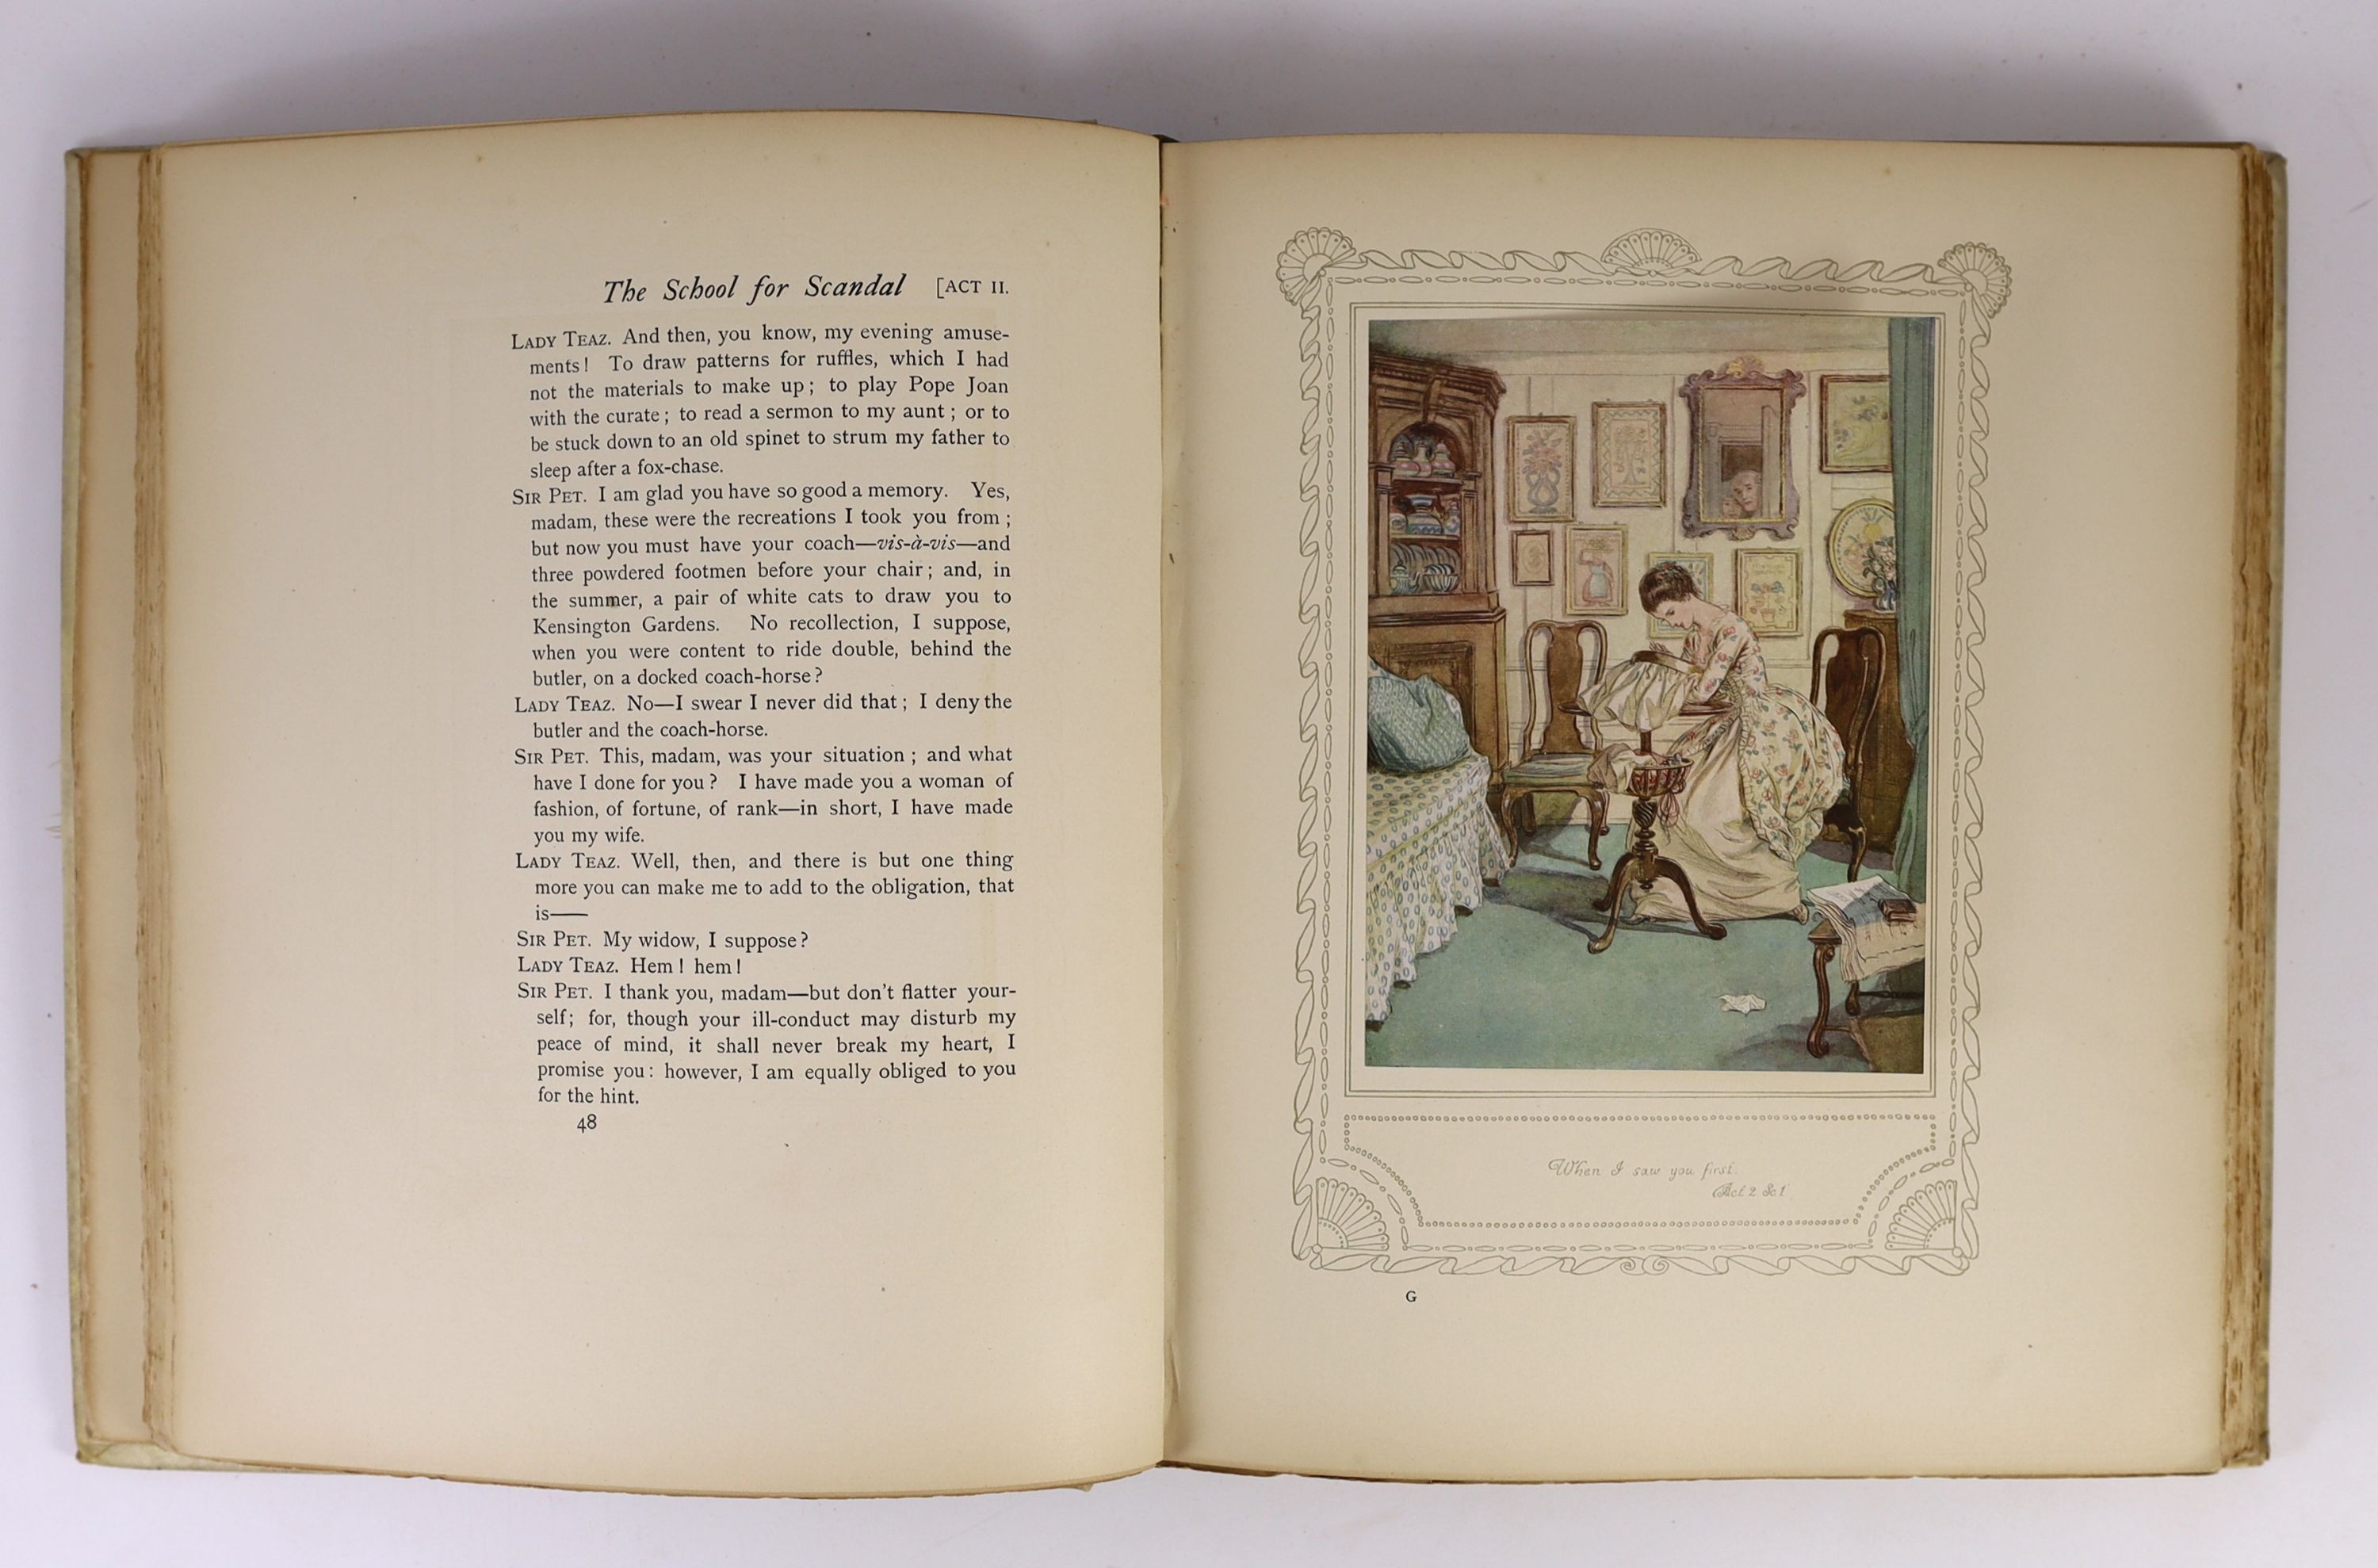 Sheridan, Richard Brinsley - The School for Scandal,de luxe edition, one of 350, signed and illustrated with 25 tipped-in colour plates by Hugh Thomson, folio, pictorial gilt vellum, Hodder and Stoughton, London, c.1911